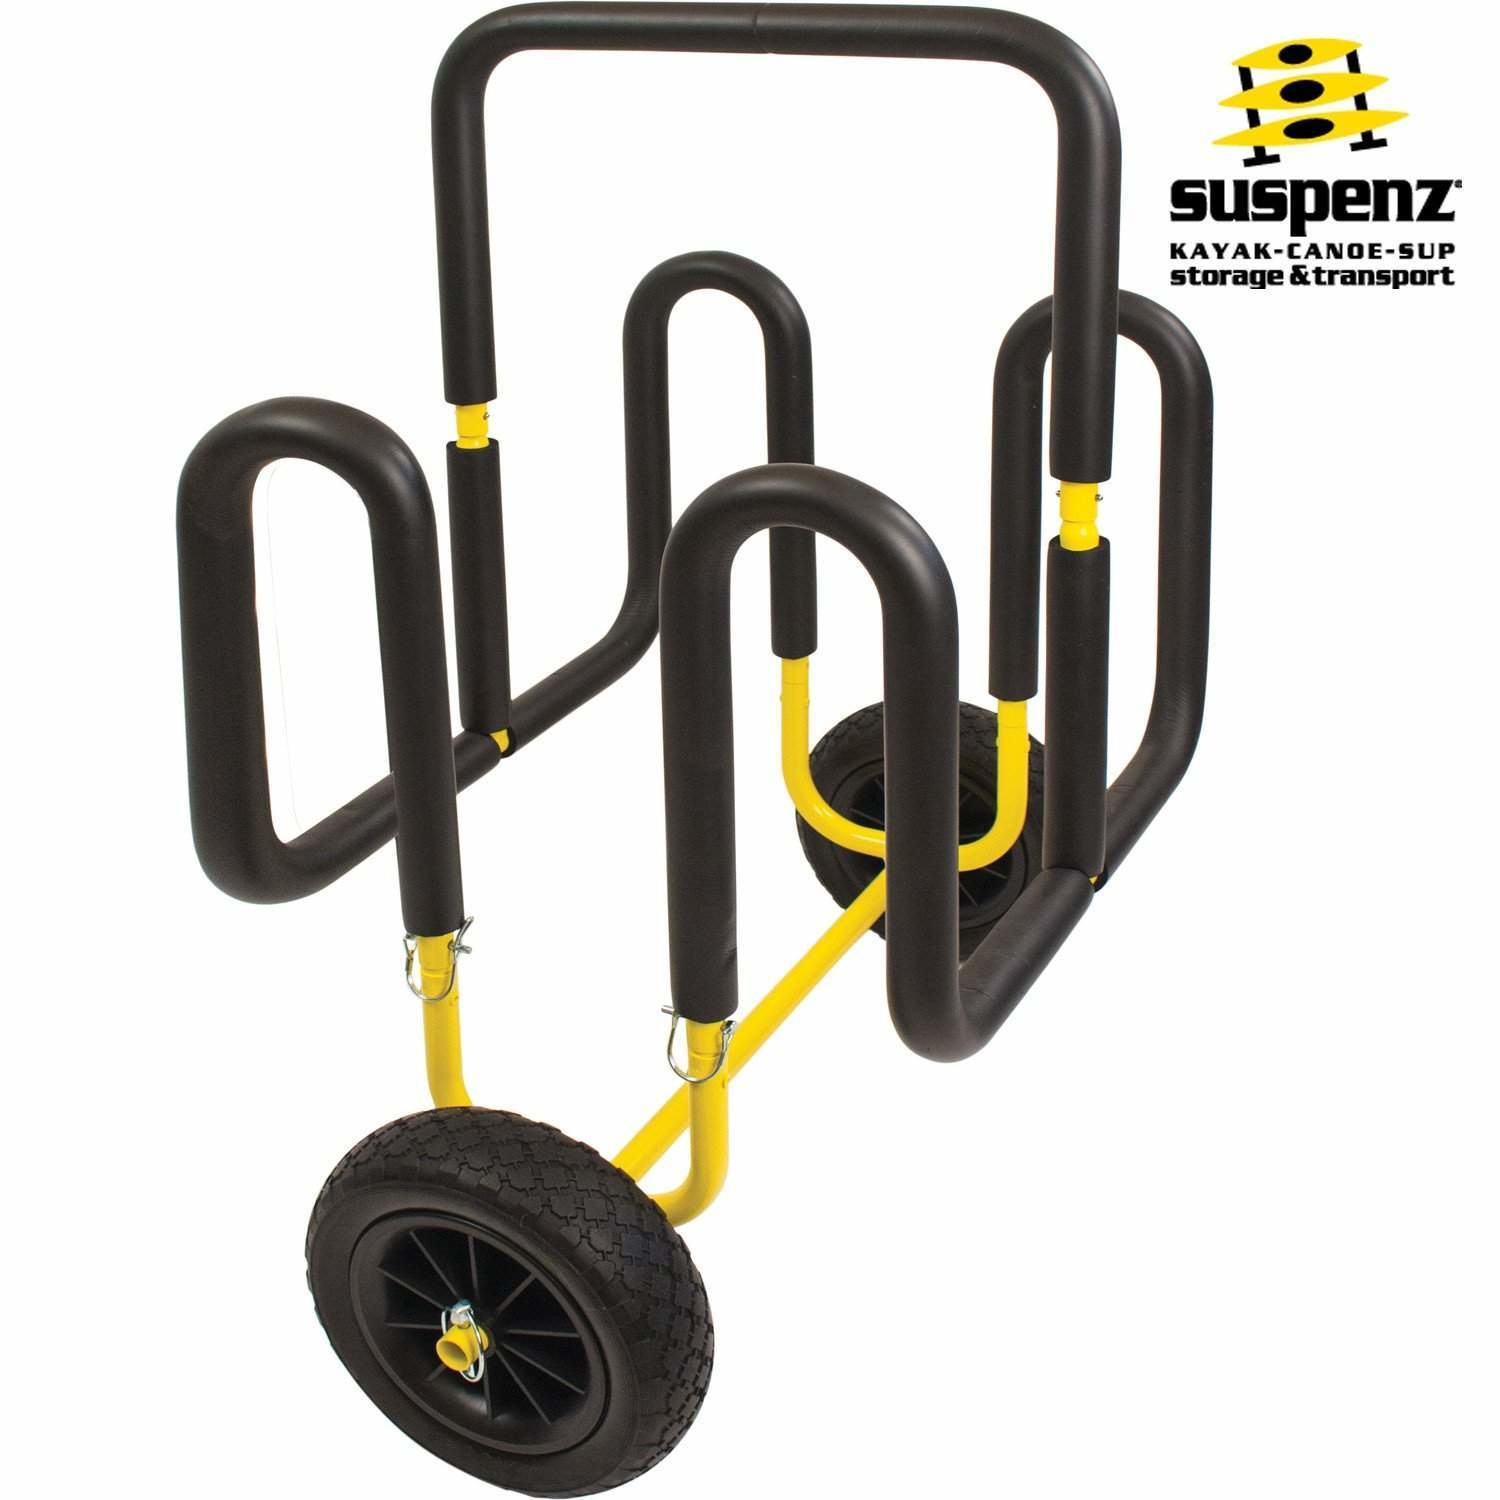 Suspenz Double-Up SUP Airless Cart - The Kayak Centre